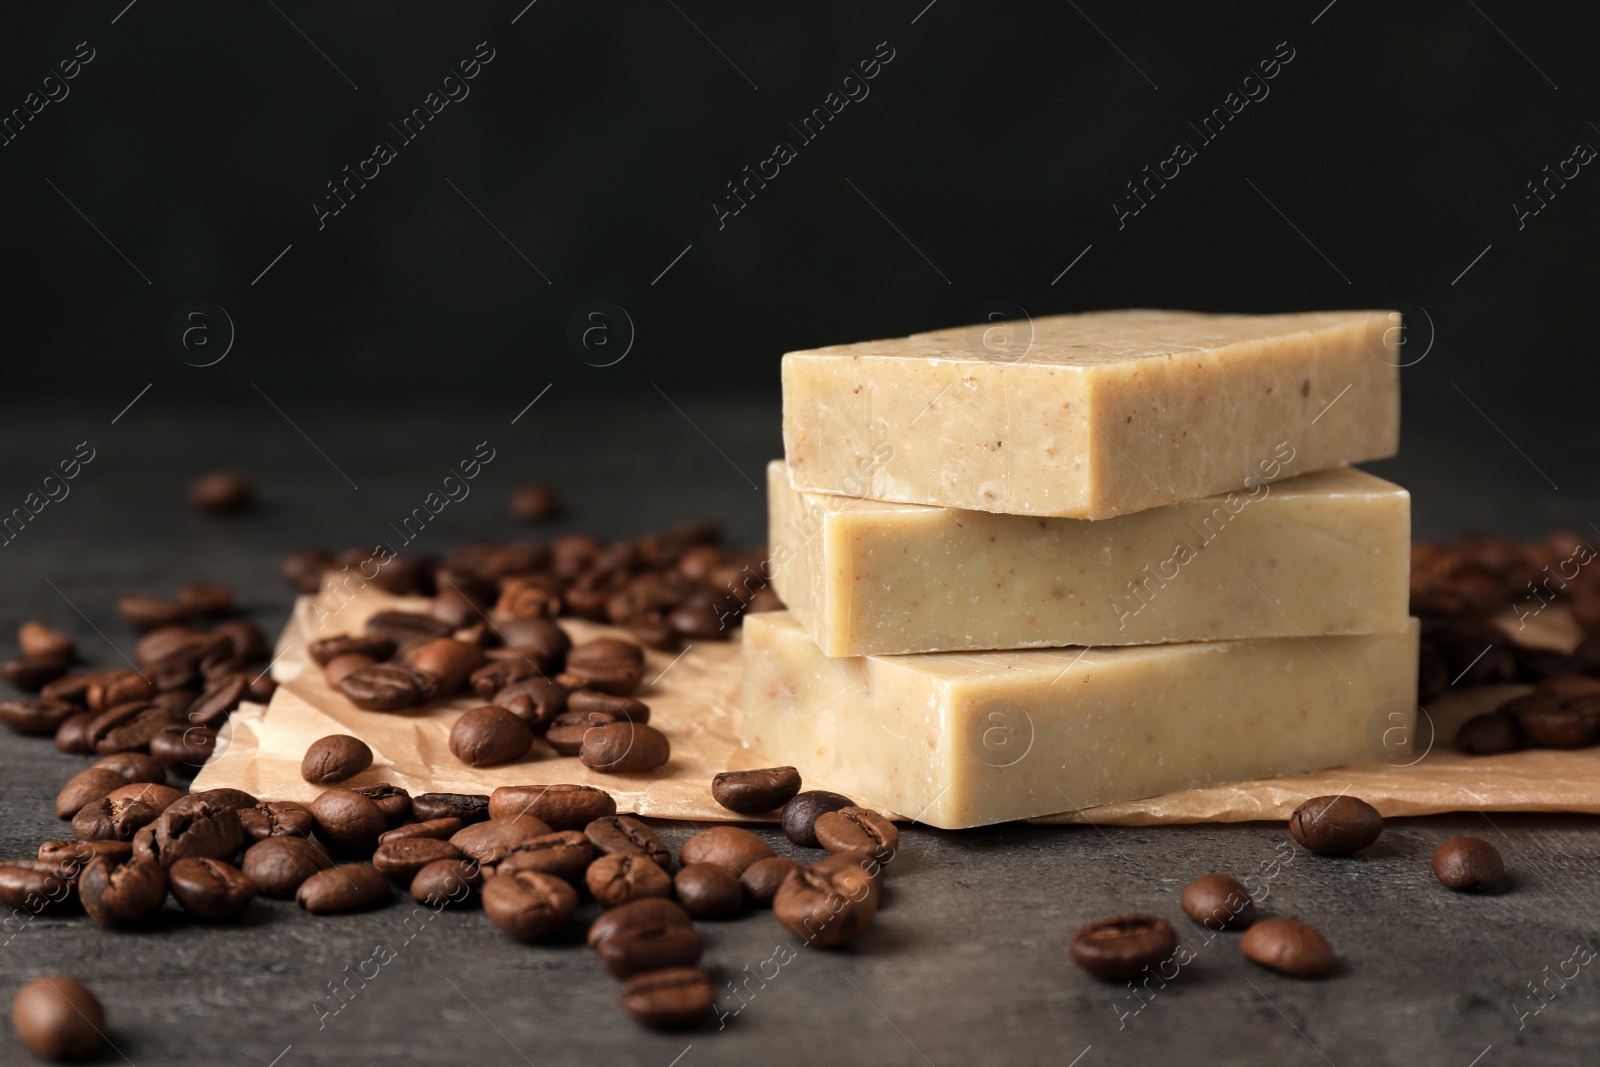 Photo of Handmade soap bars and coffee beans on table